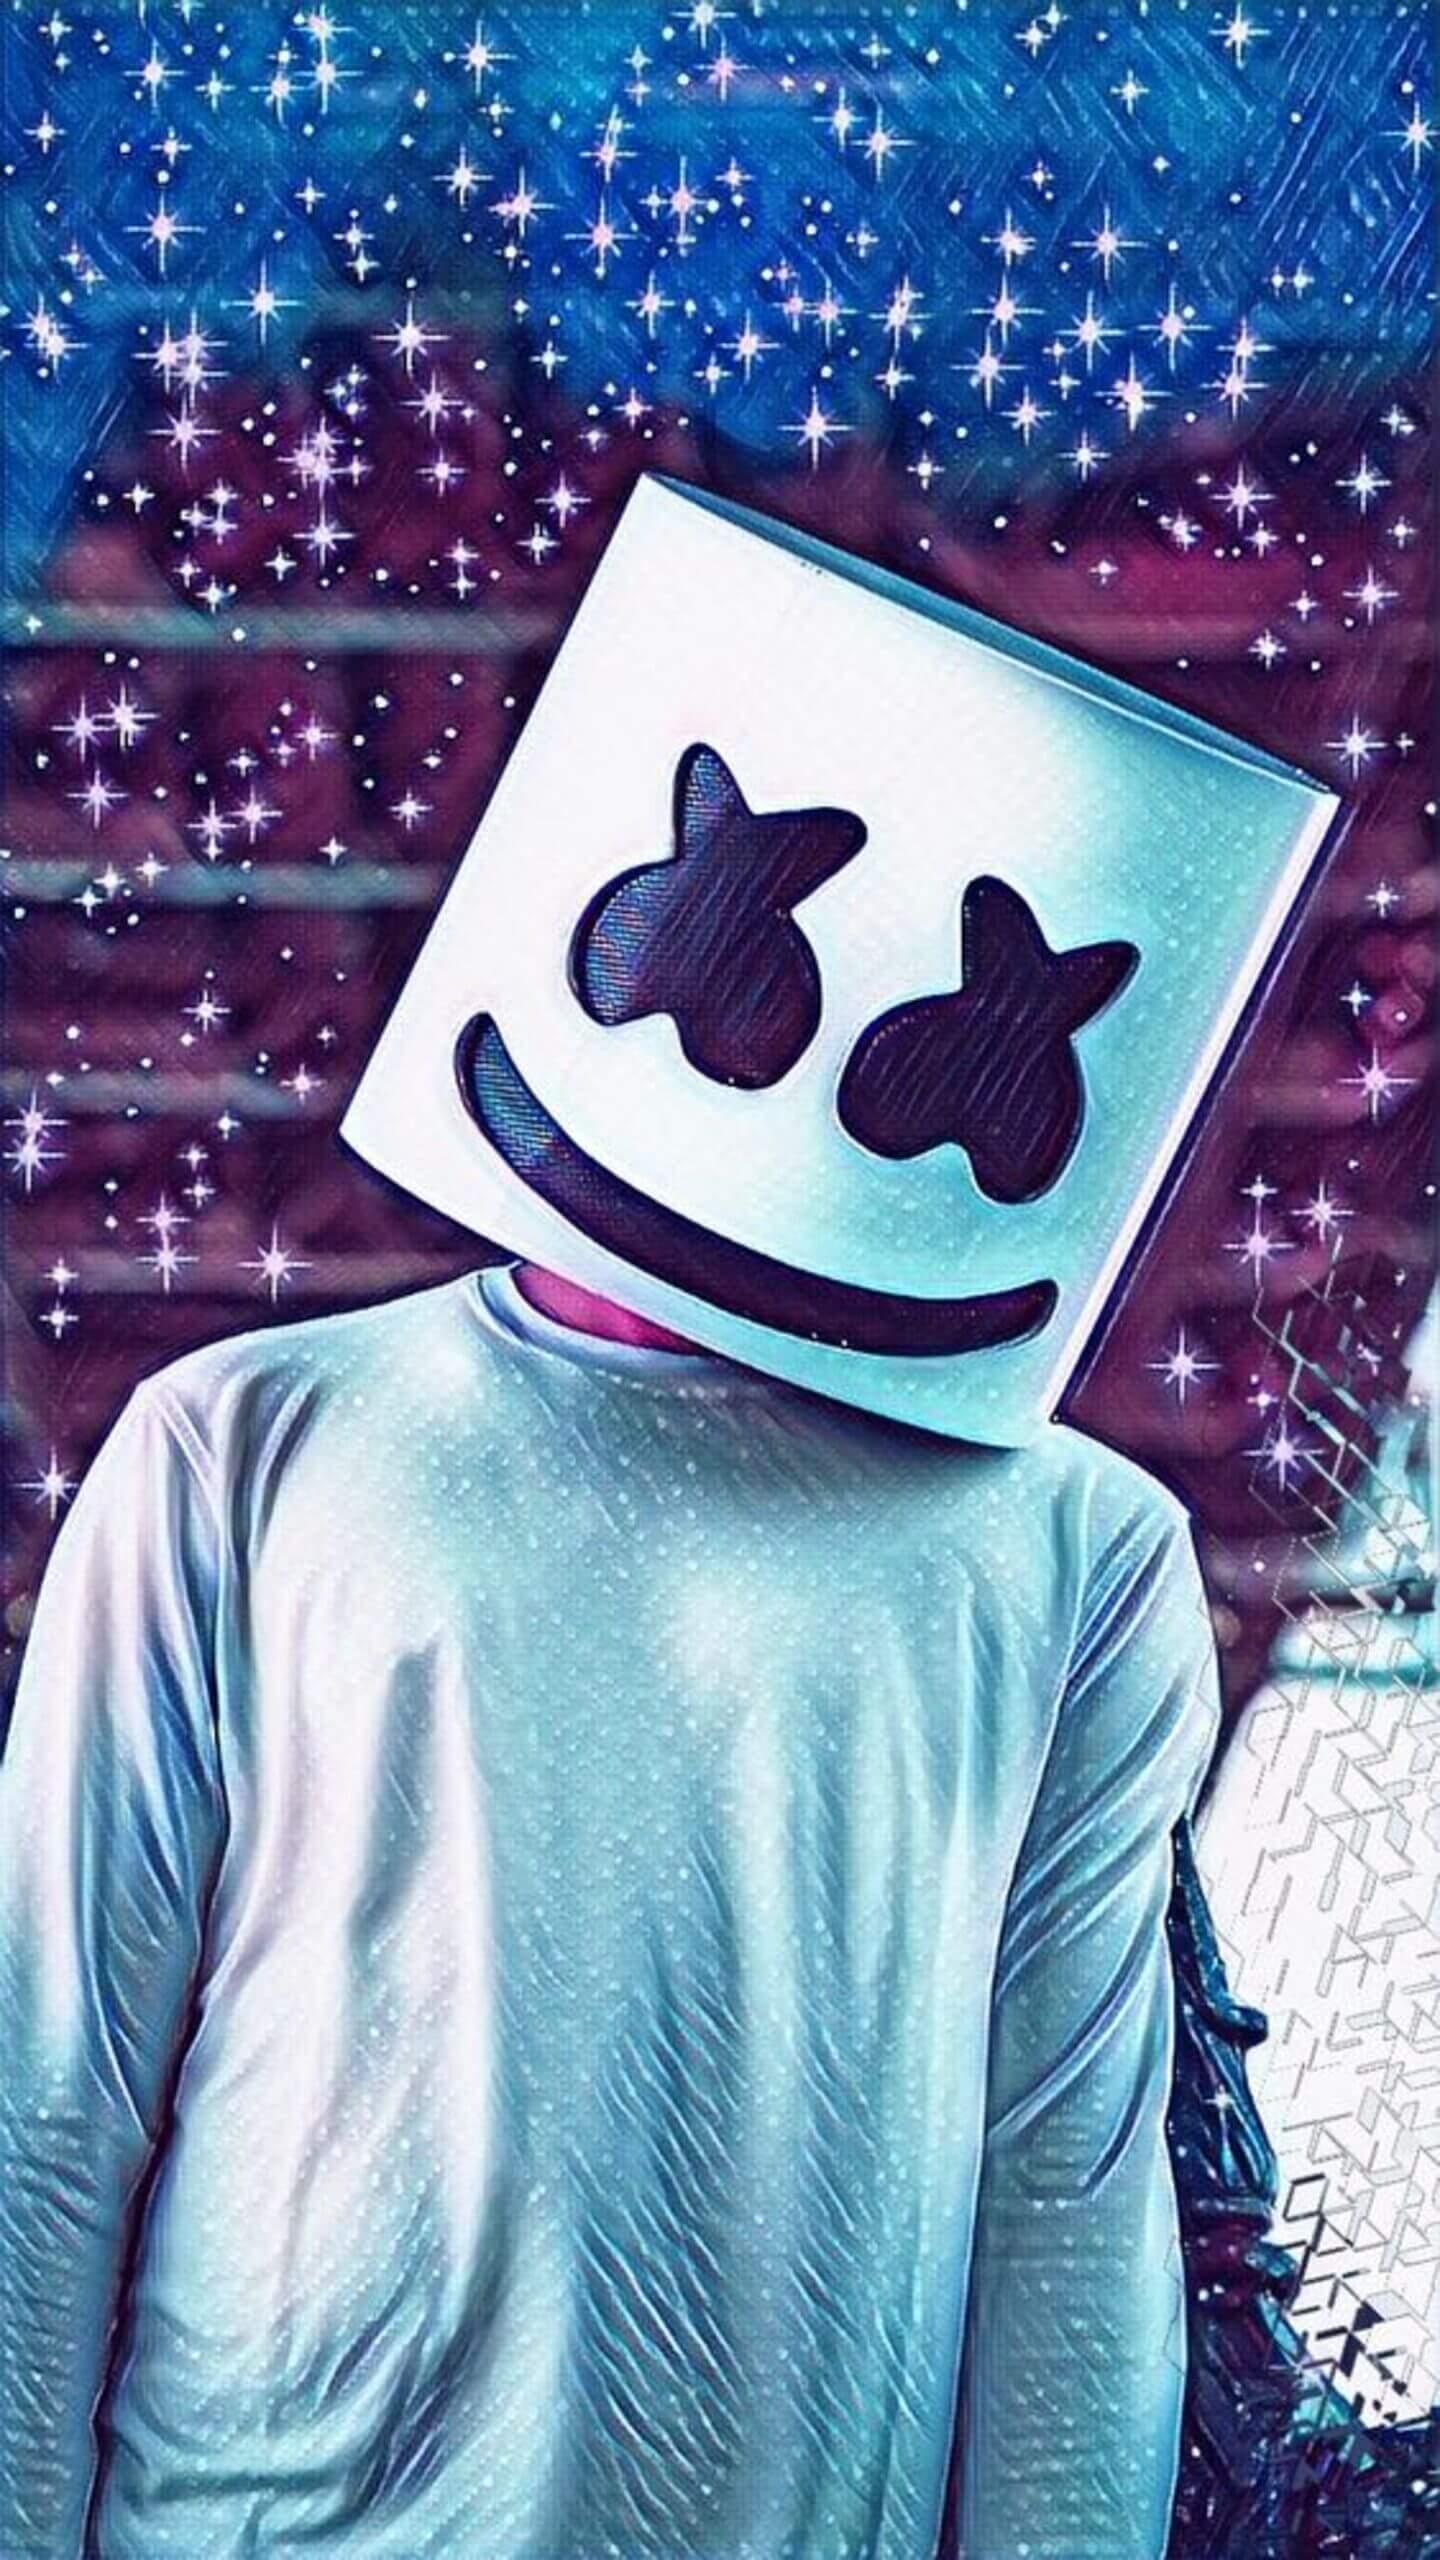 Marshmello Wallpaper Hd New For Android Apk Download